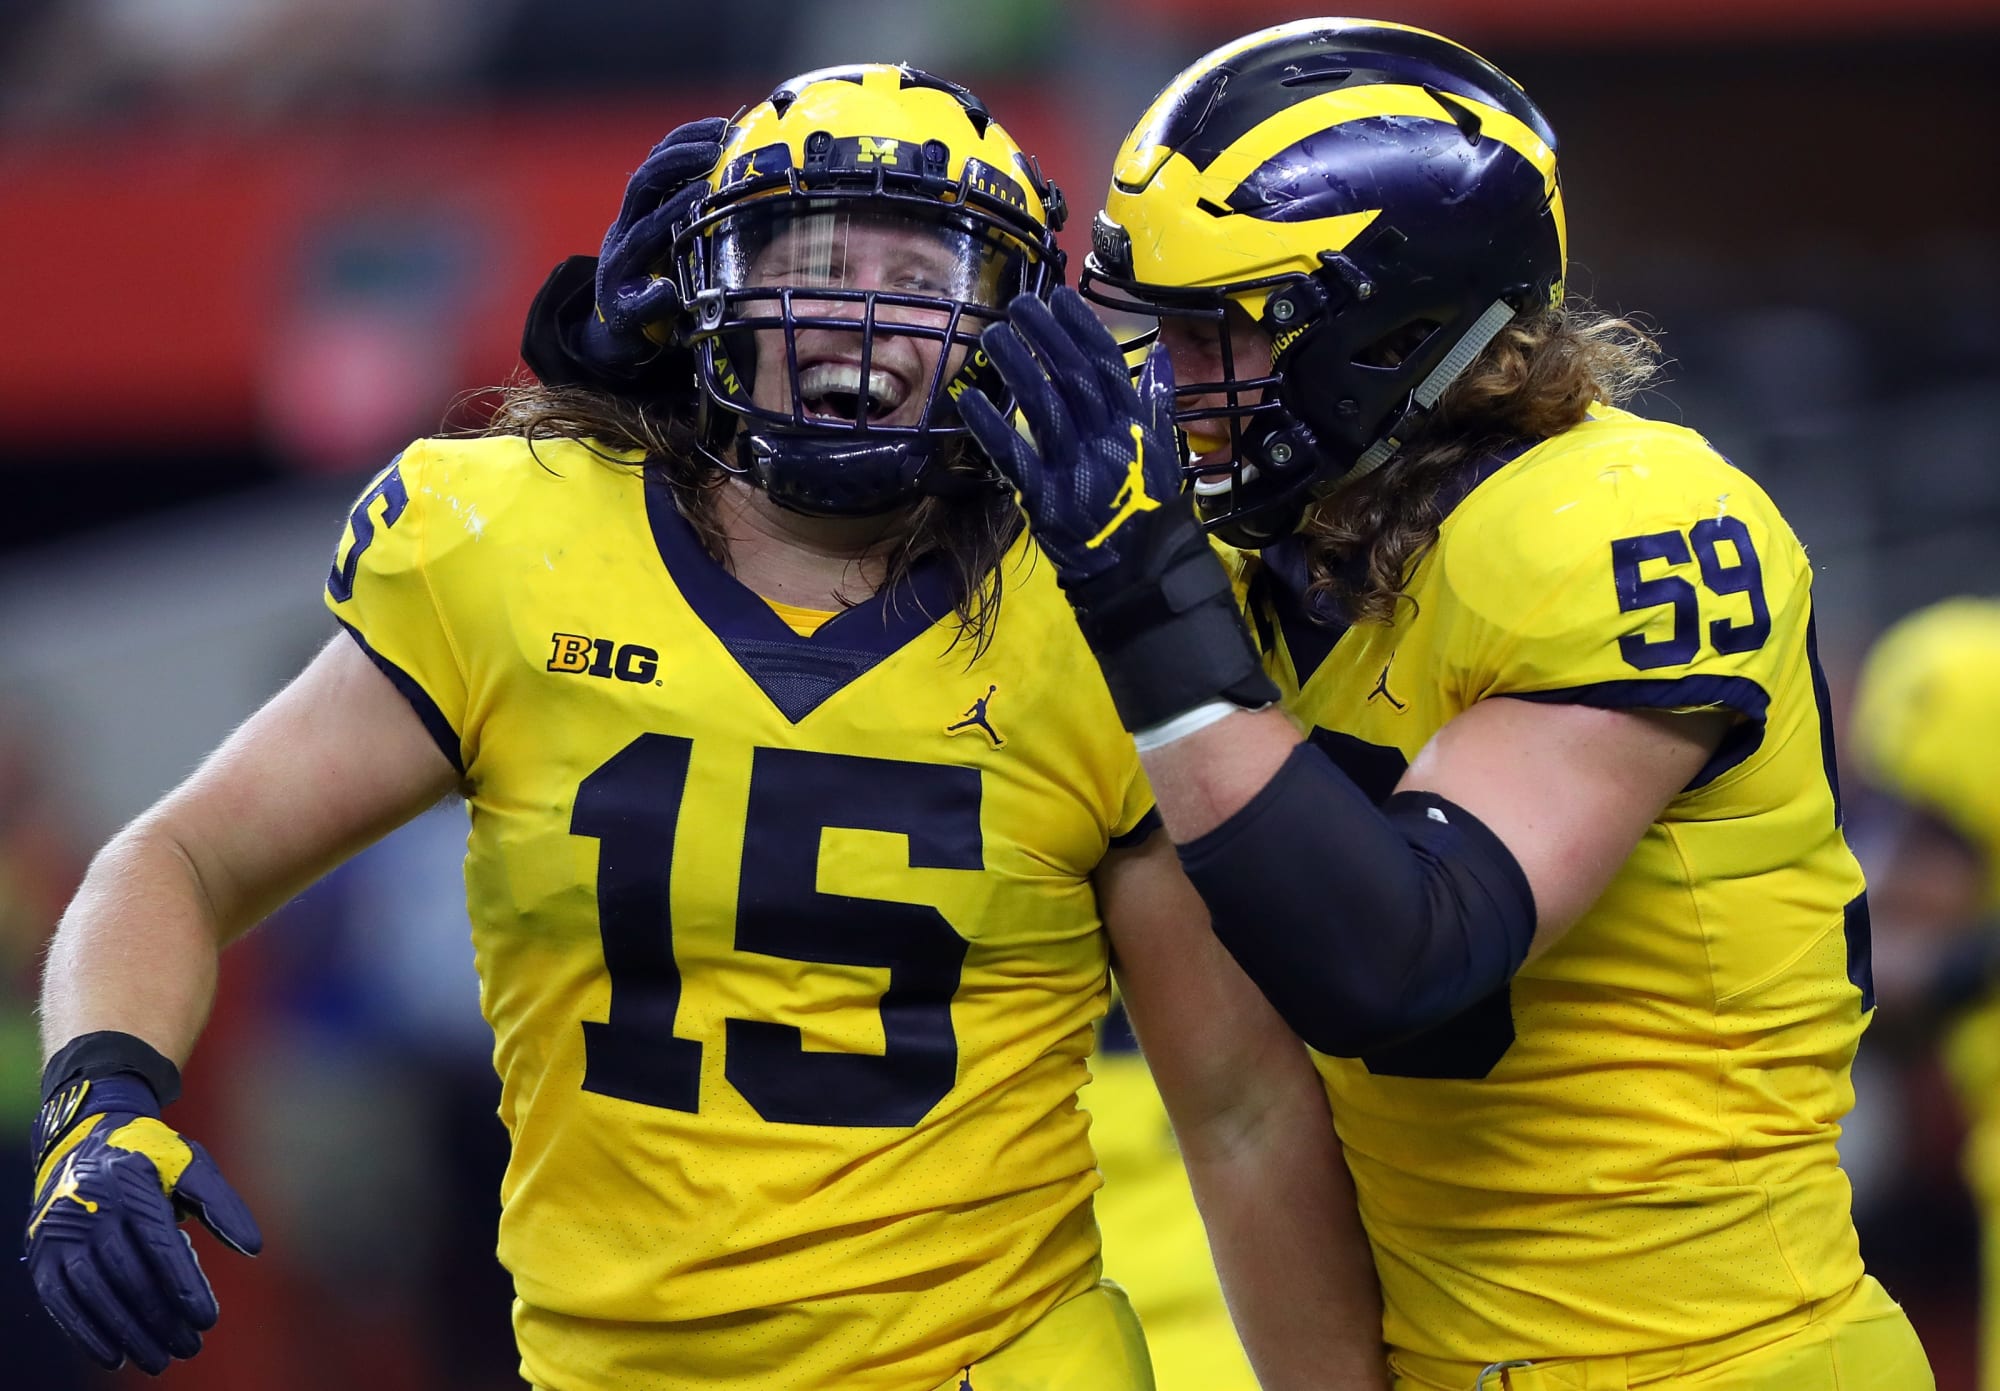 Michigan Football Alternate uniforms on the way for Wolverines?